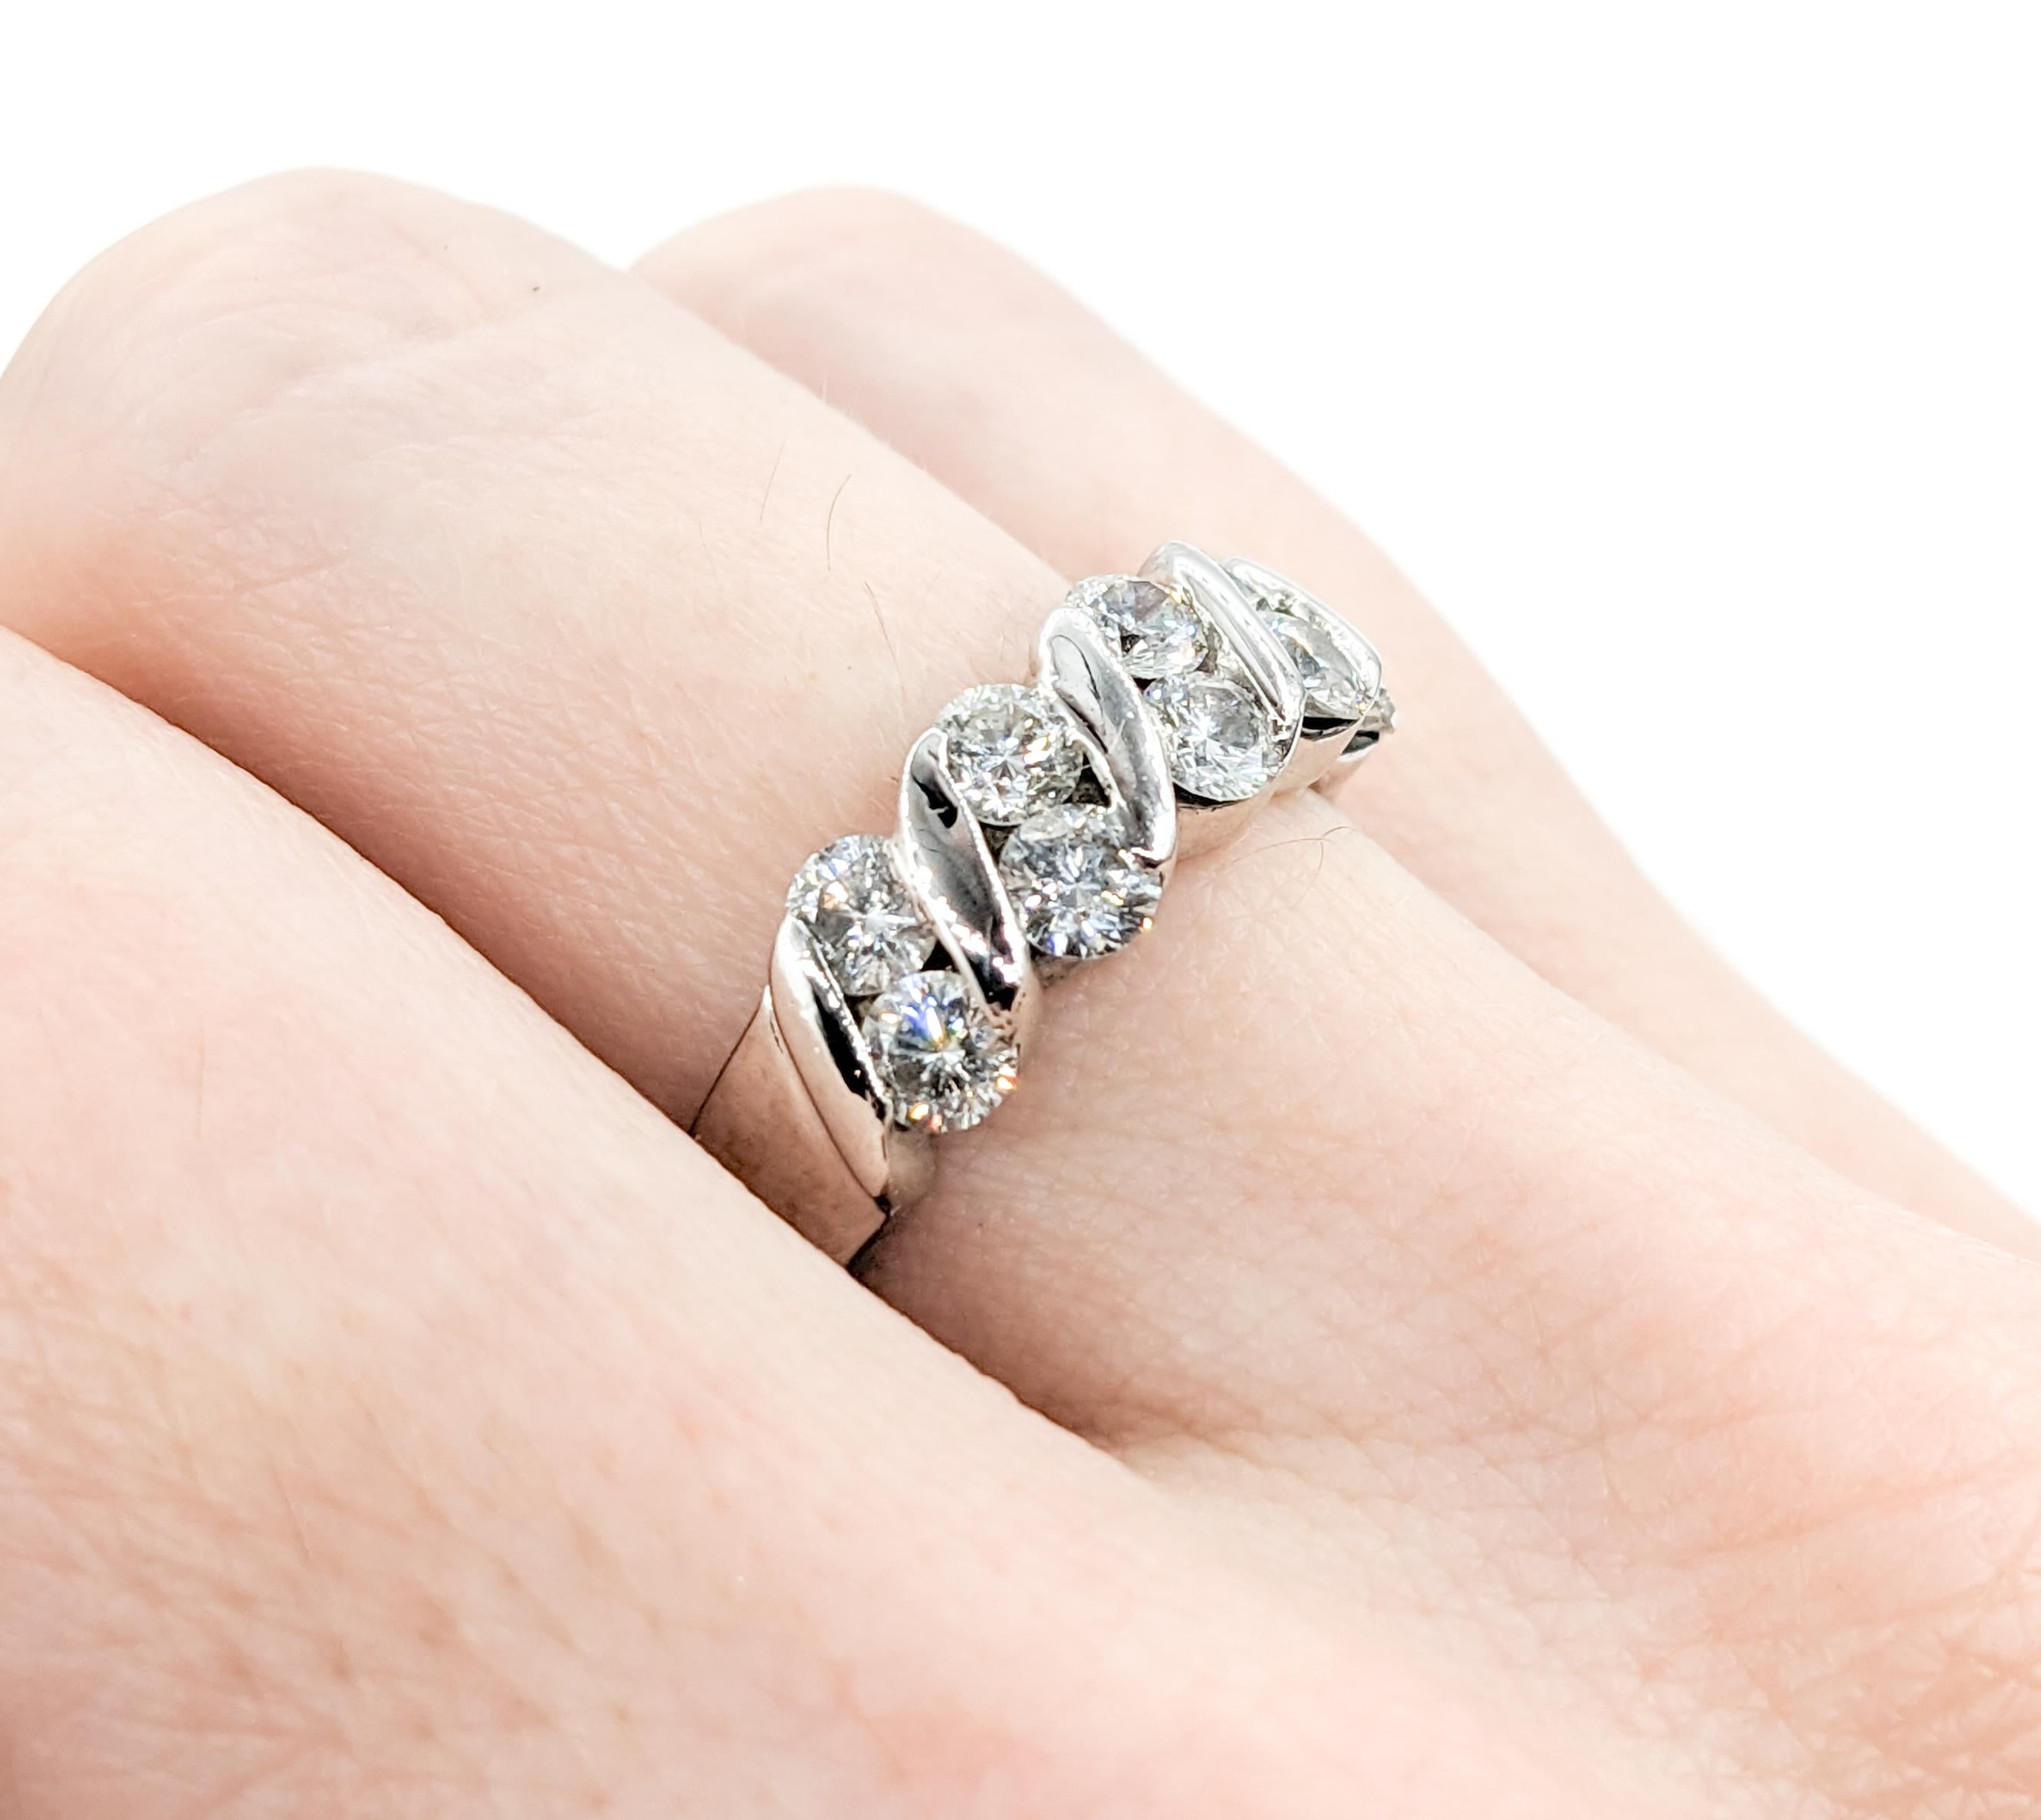 1ctw Channel-Set Diamond Ring White Gold In Excellent Condition For Sale In Bloomington, MN